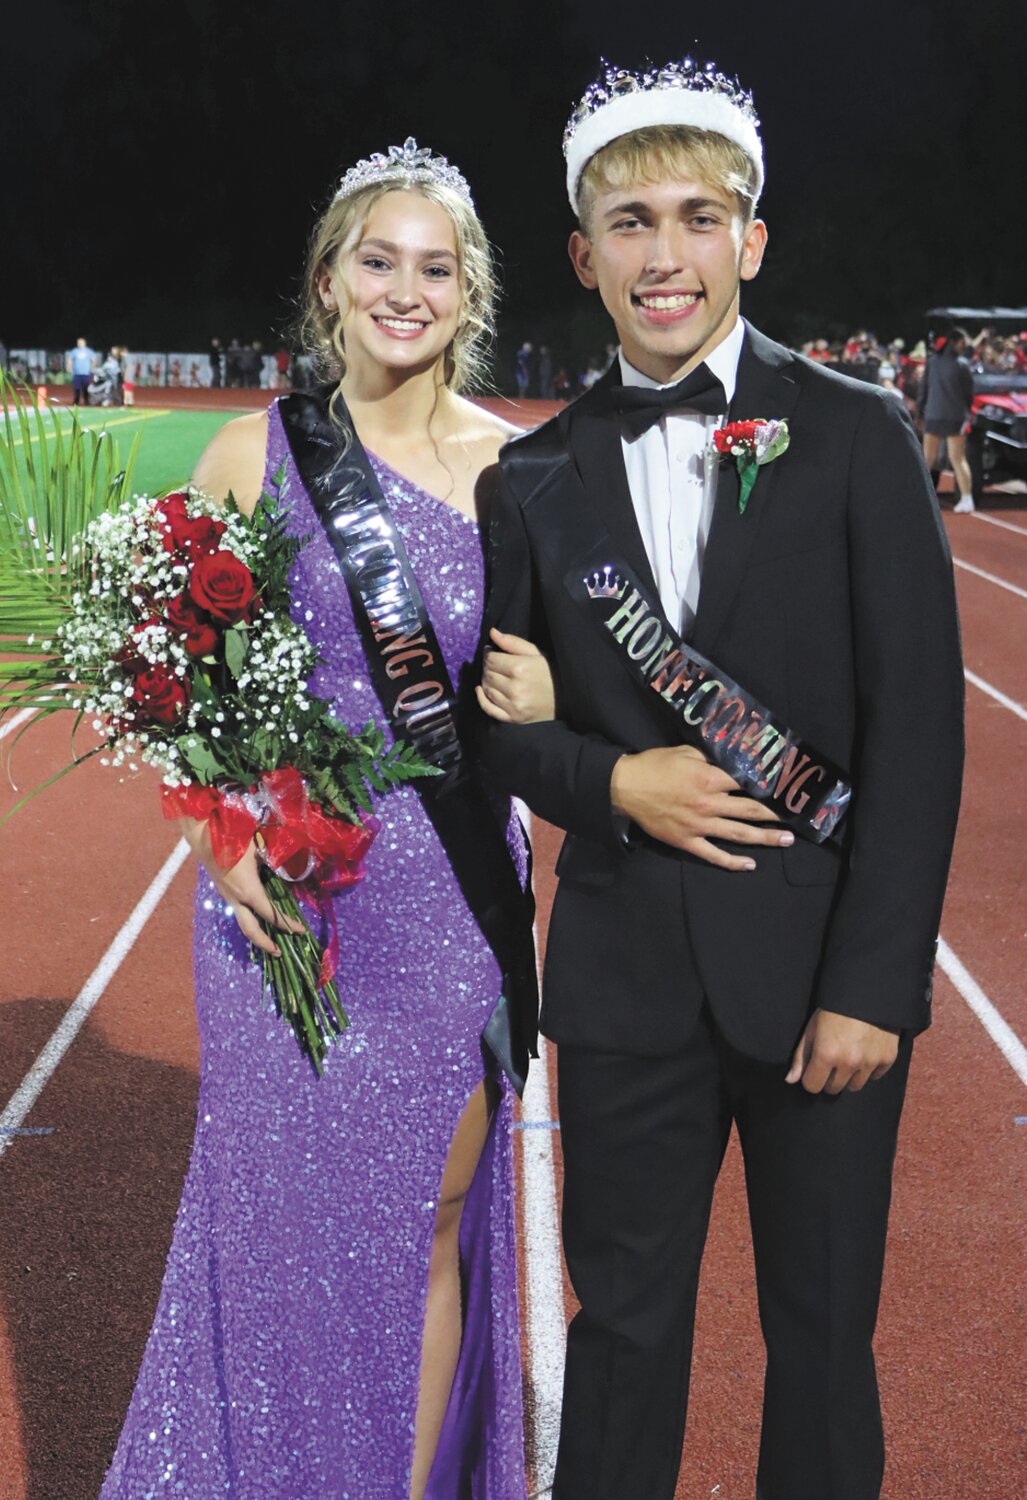 Cheyenne Shaw and Logan Link were crowned the Fall Homecoming Queen and King at Southmont High School on Friday...